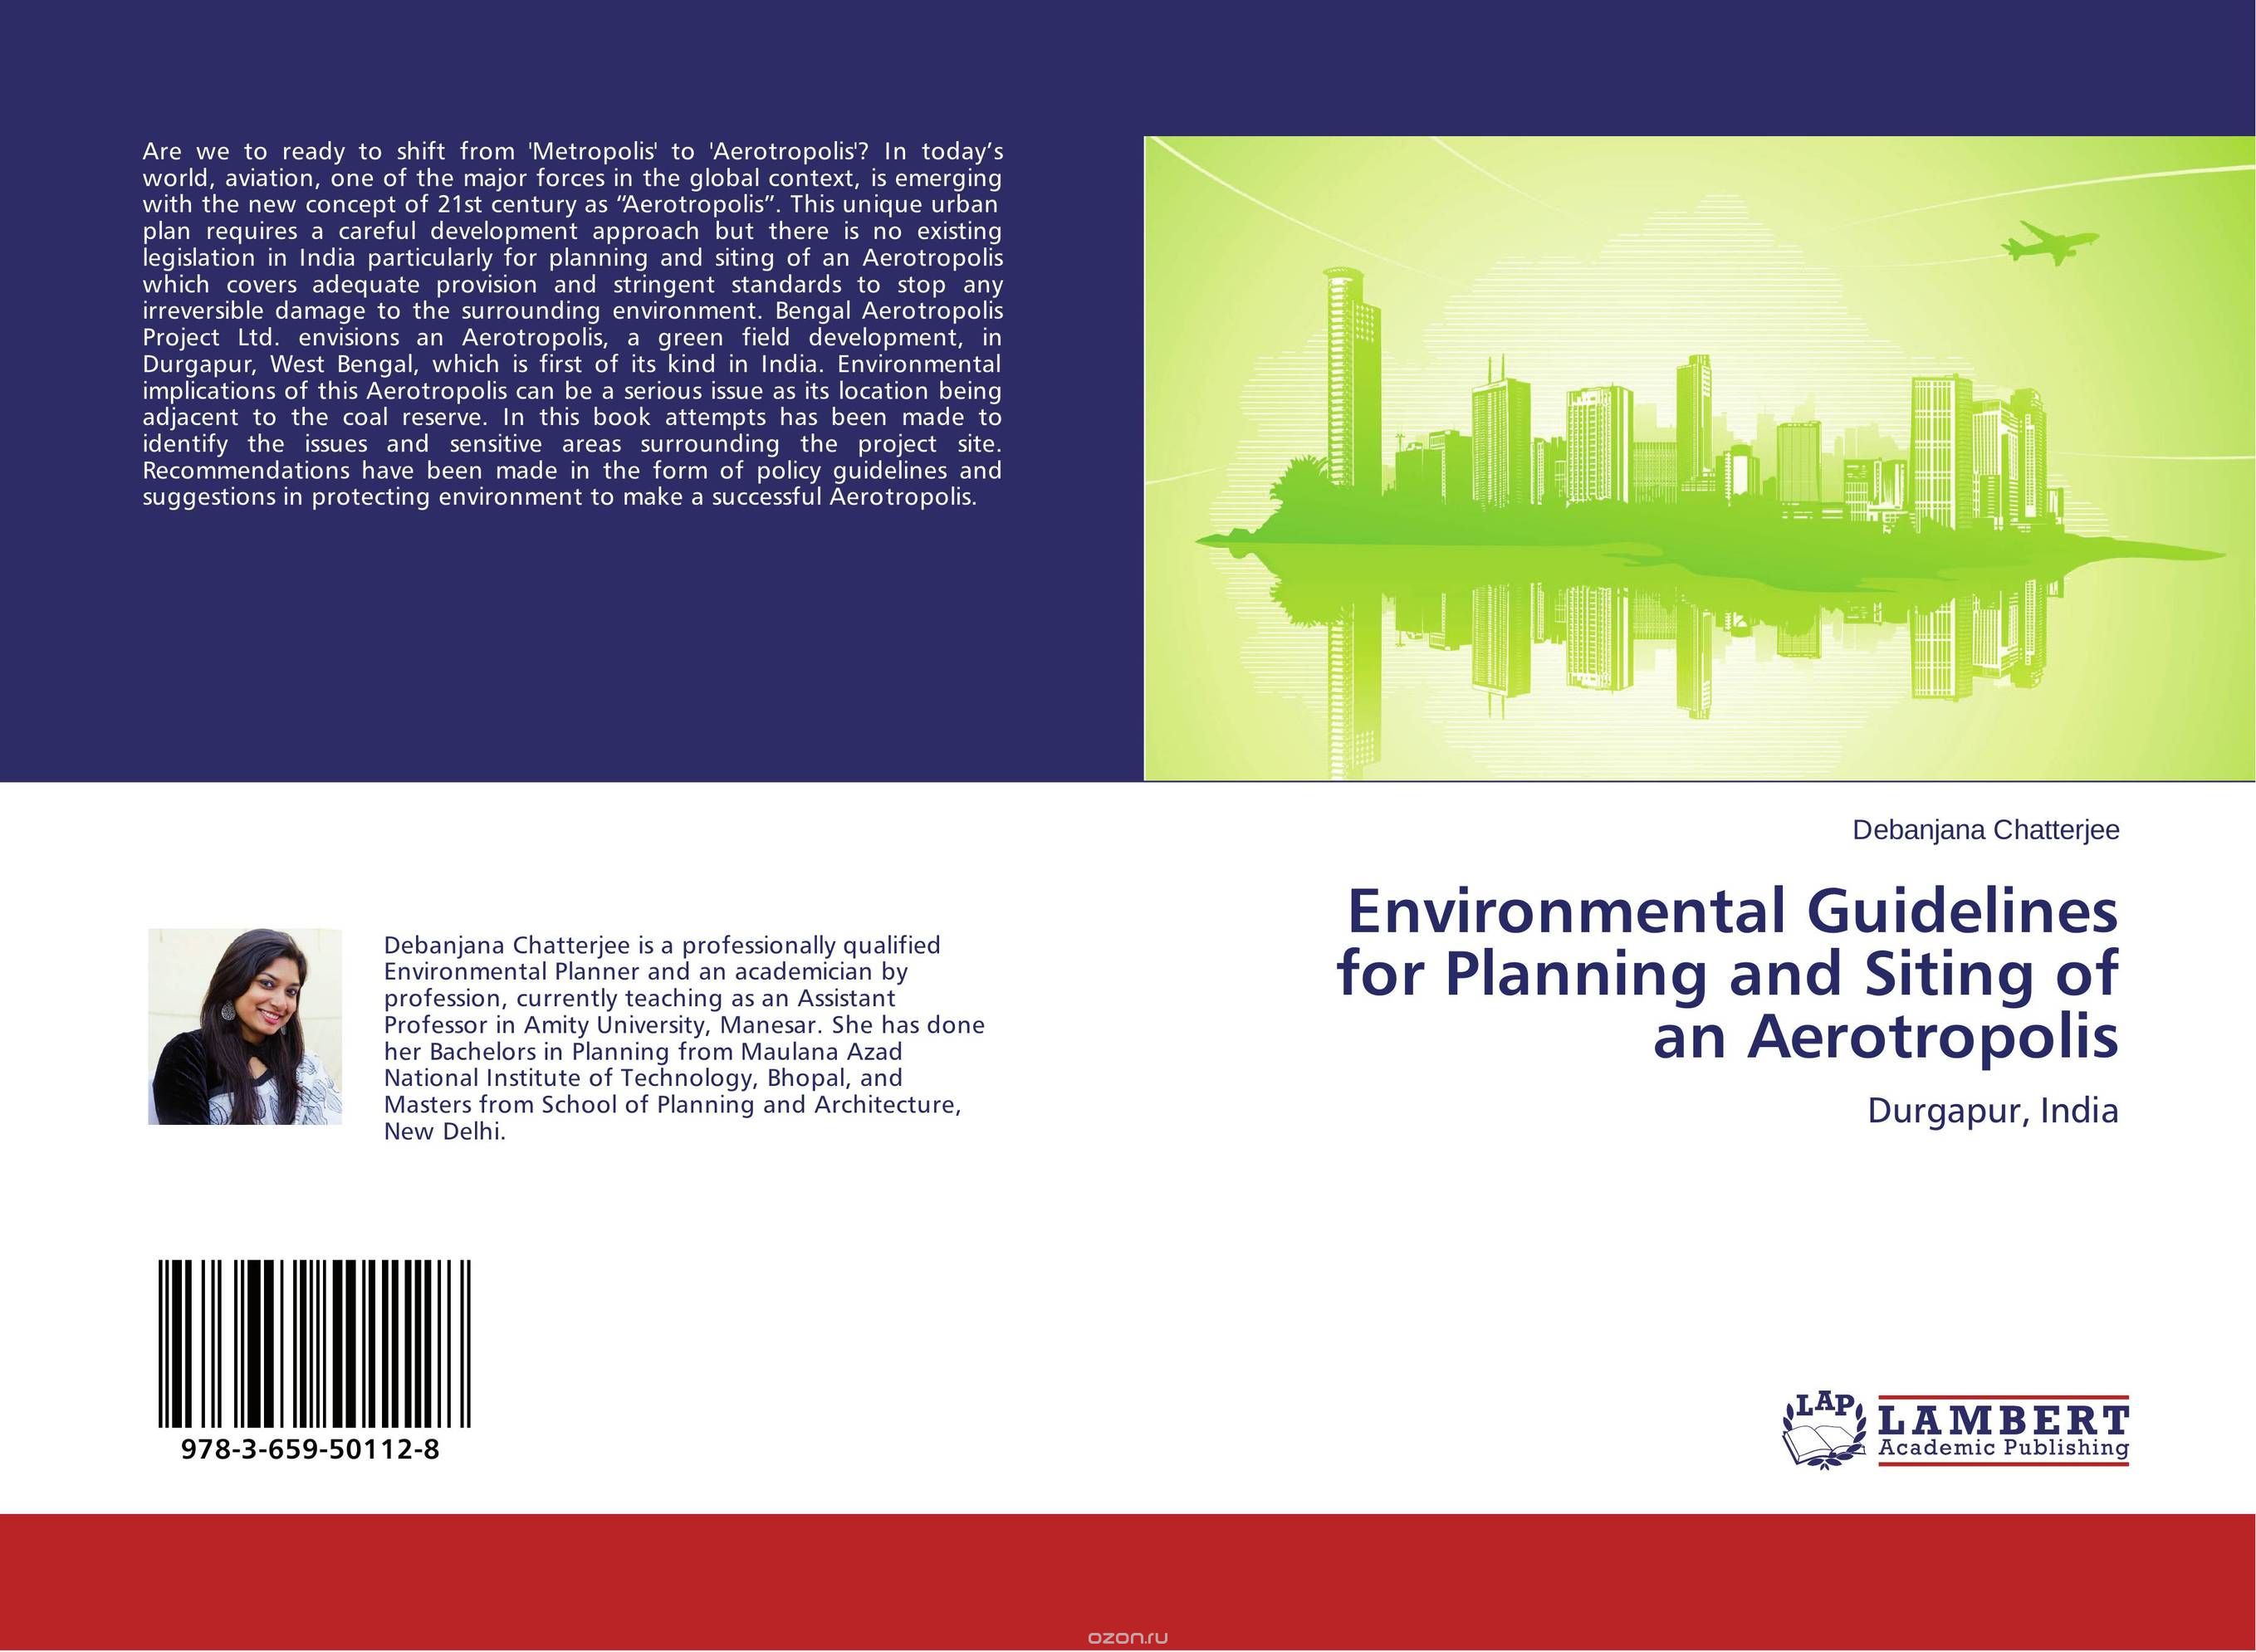 Environmental Guidelines for Planning and Siting of an Aerotropolis